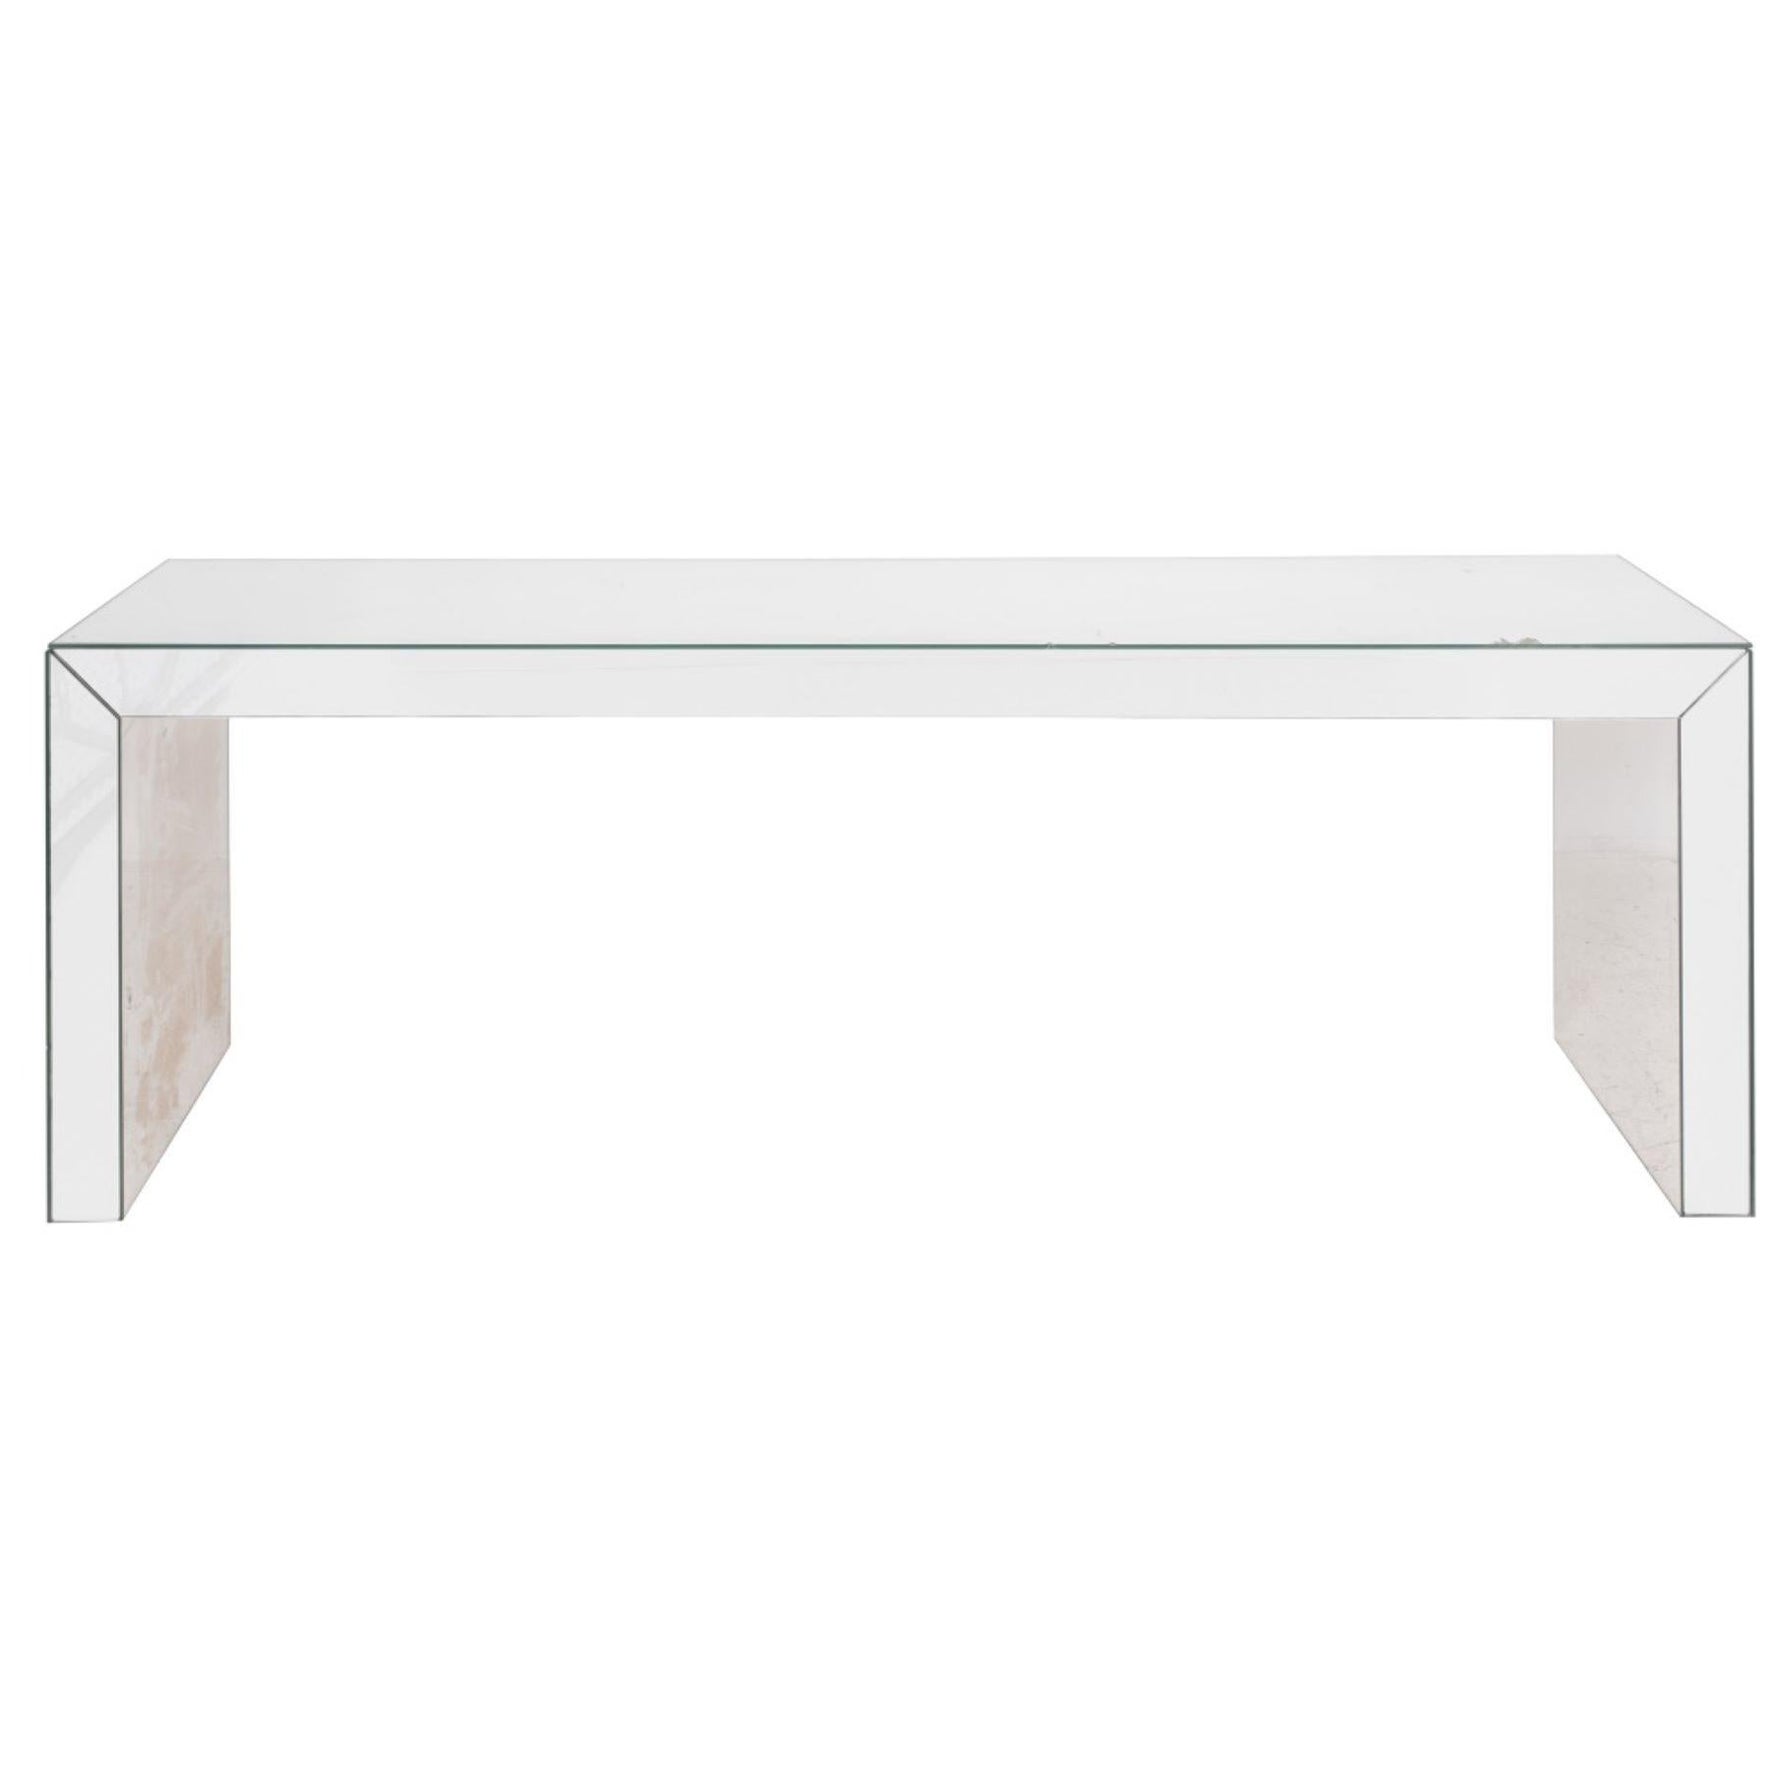 Mirrored Long Waterfall Console or Sofa Table For Sale